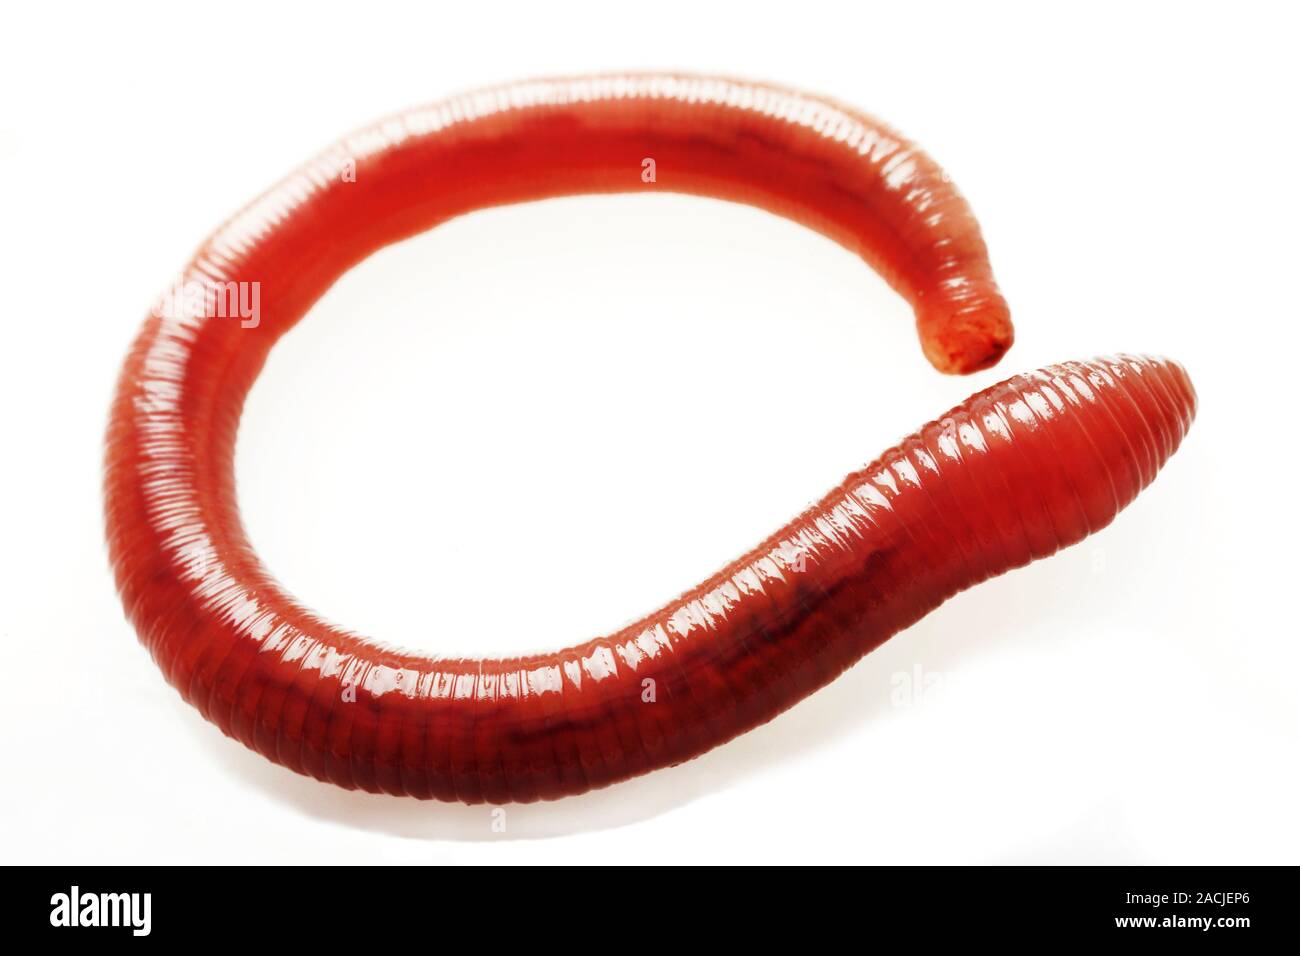 Earthworm (order Haplotaxida). This is an annelid worm that inhabits soil, feeding on organic material. Earthworms are highly beneficial as their move Stock Photo